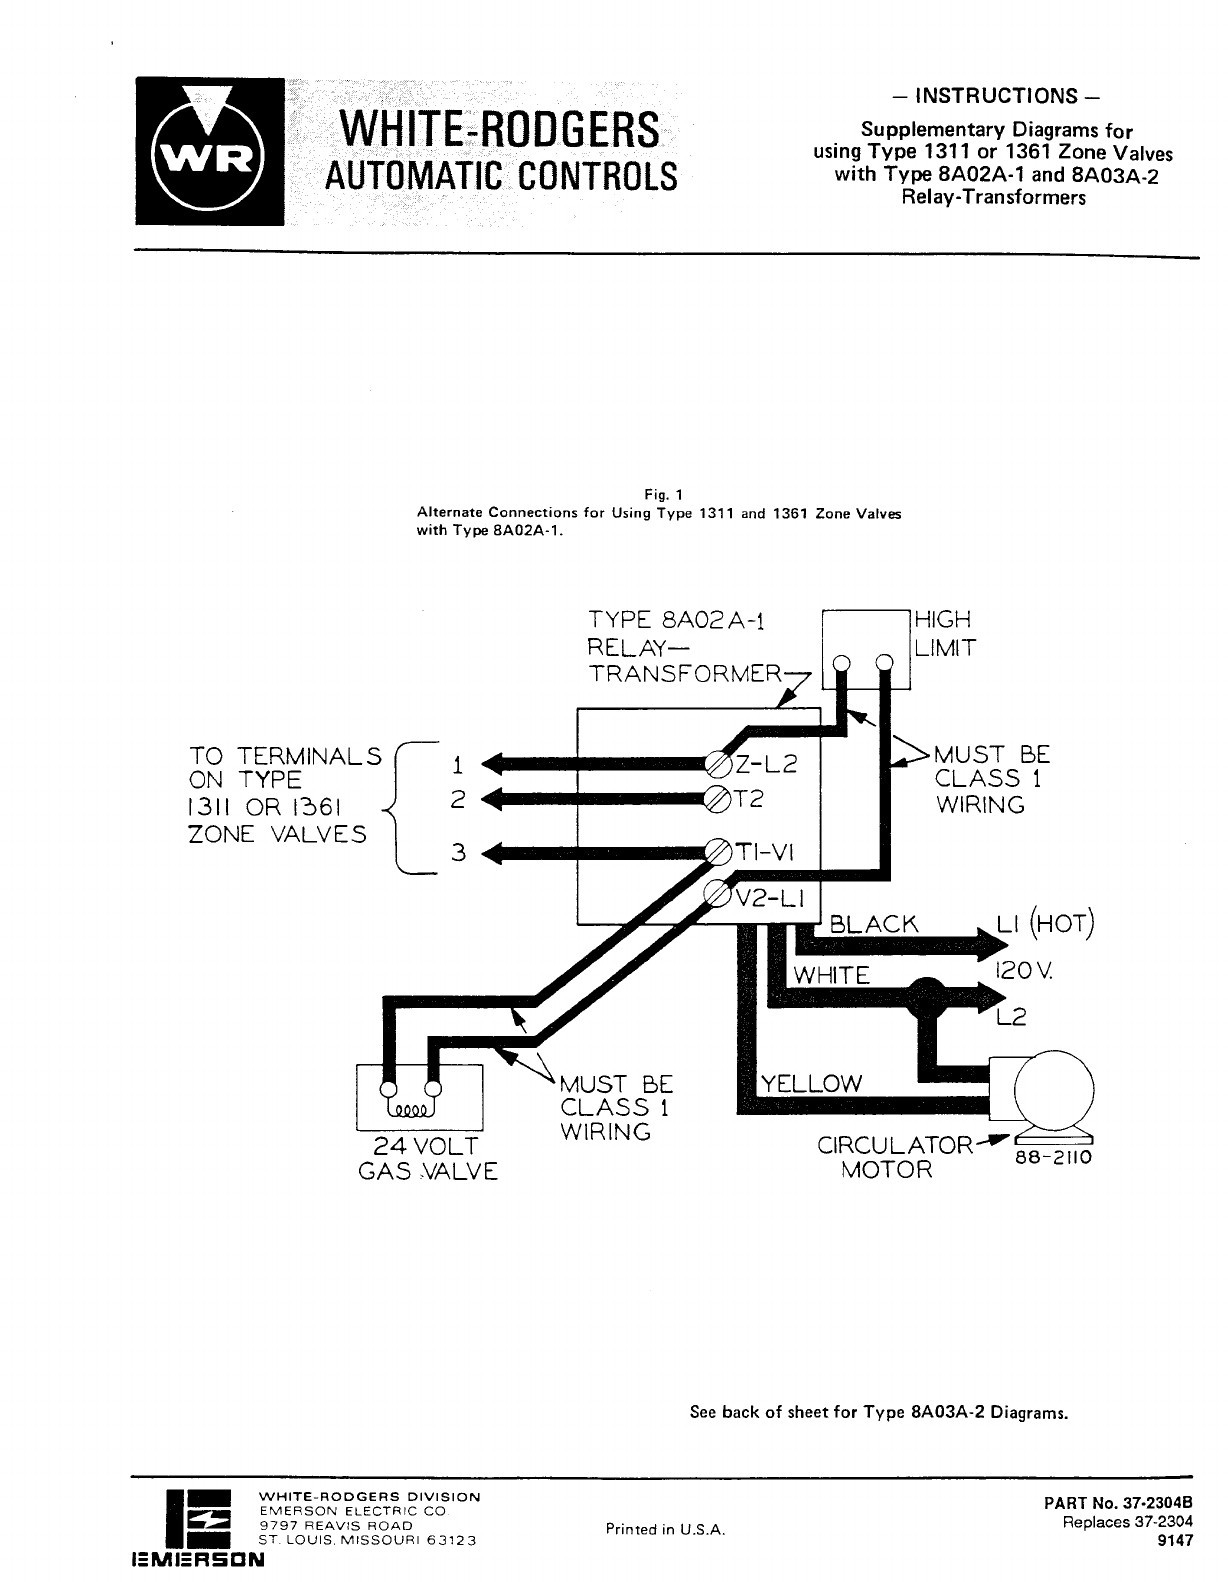 Wiring Diagram For Honeywell T40 Thermostat Refrence White Rodgers Transformer Wiring Diagram Data Wiring •